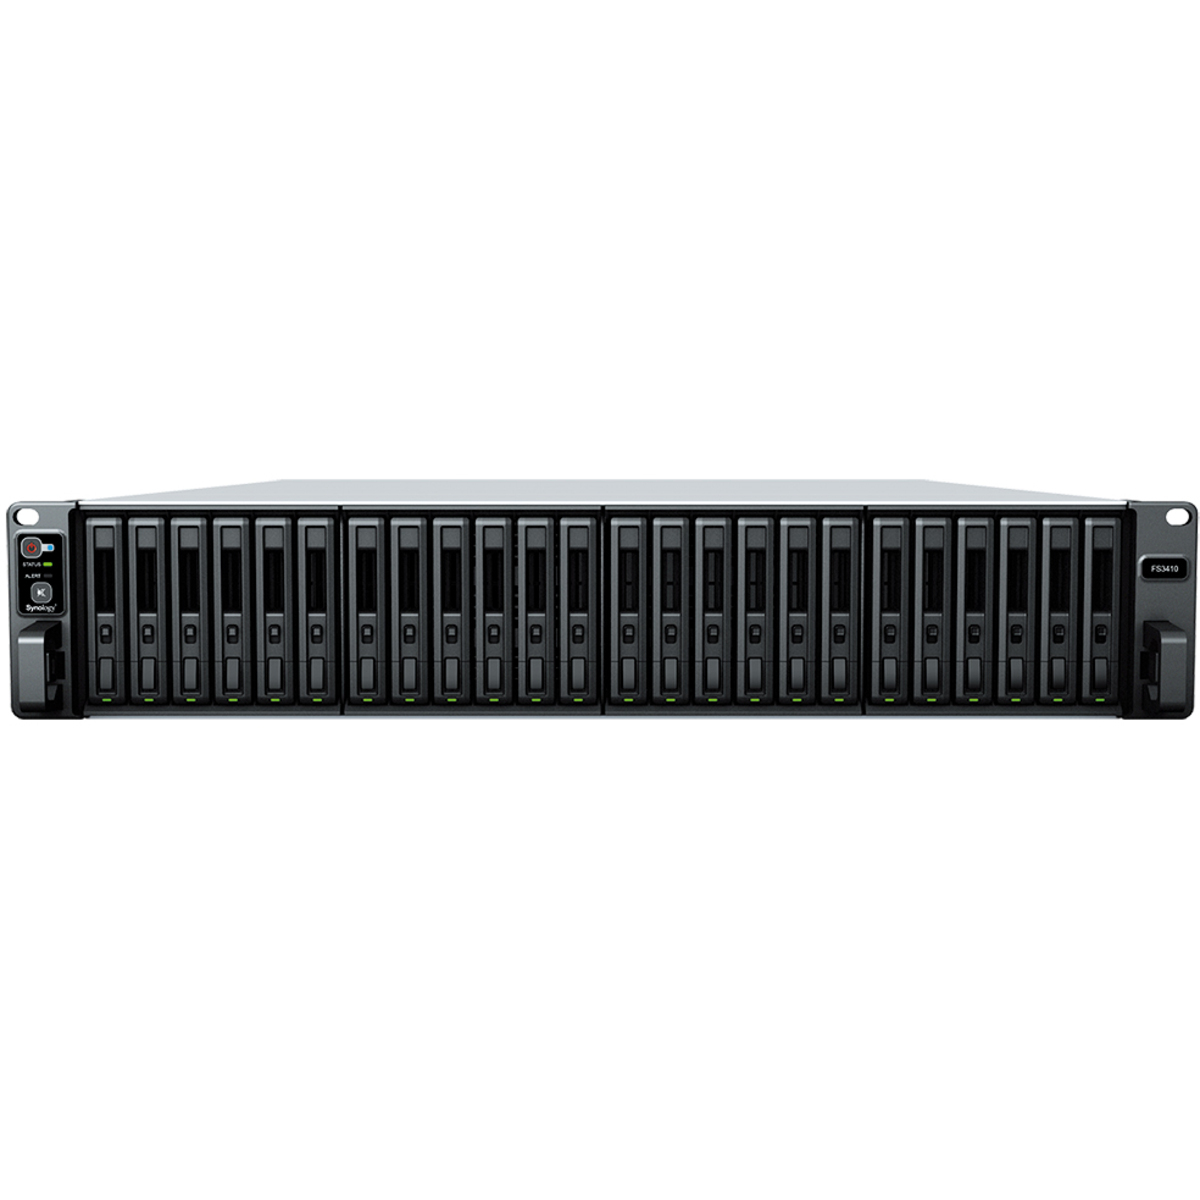 Synology FlashStation FS3410 24tb 24-Bay RackMount Large Business / Enterprise NAS - Network Attached Storage Device 24x1tb Sandisk Ultra 3D SDSSDH3-1T00 2.5 560/520MB/s SATA 6Gb/s SSD CONSUMER Class Drives Installed - Burn-In Tested FlashStation FS3410